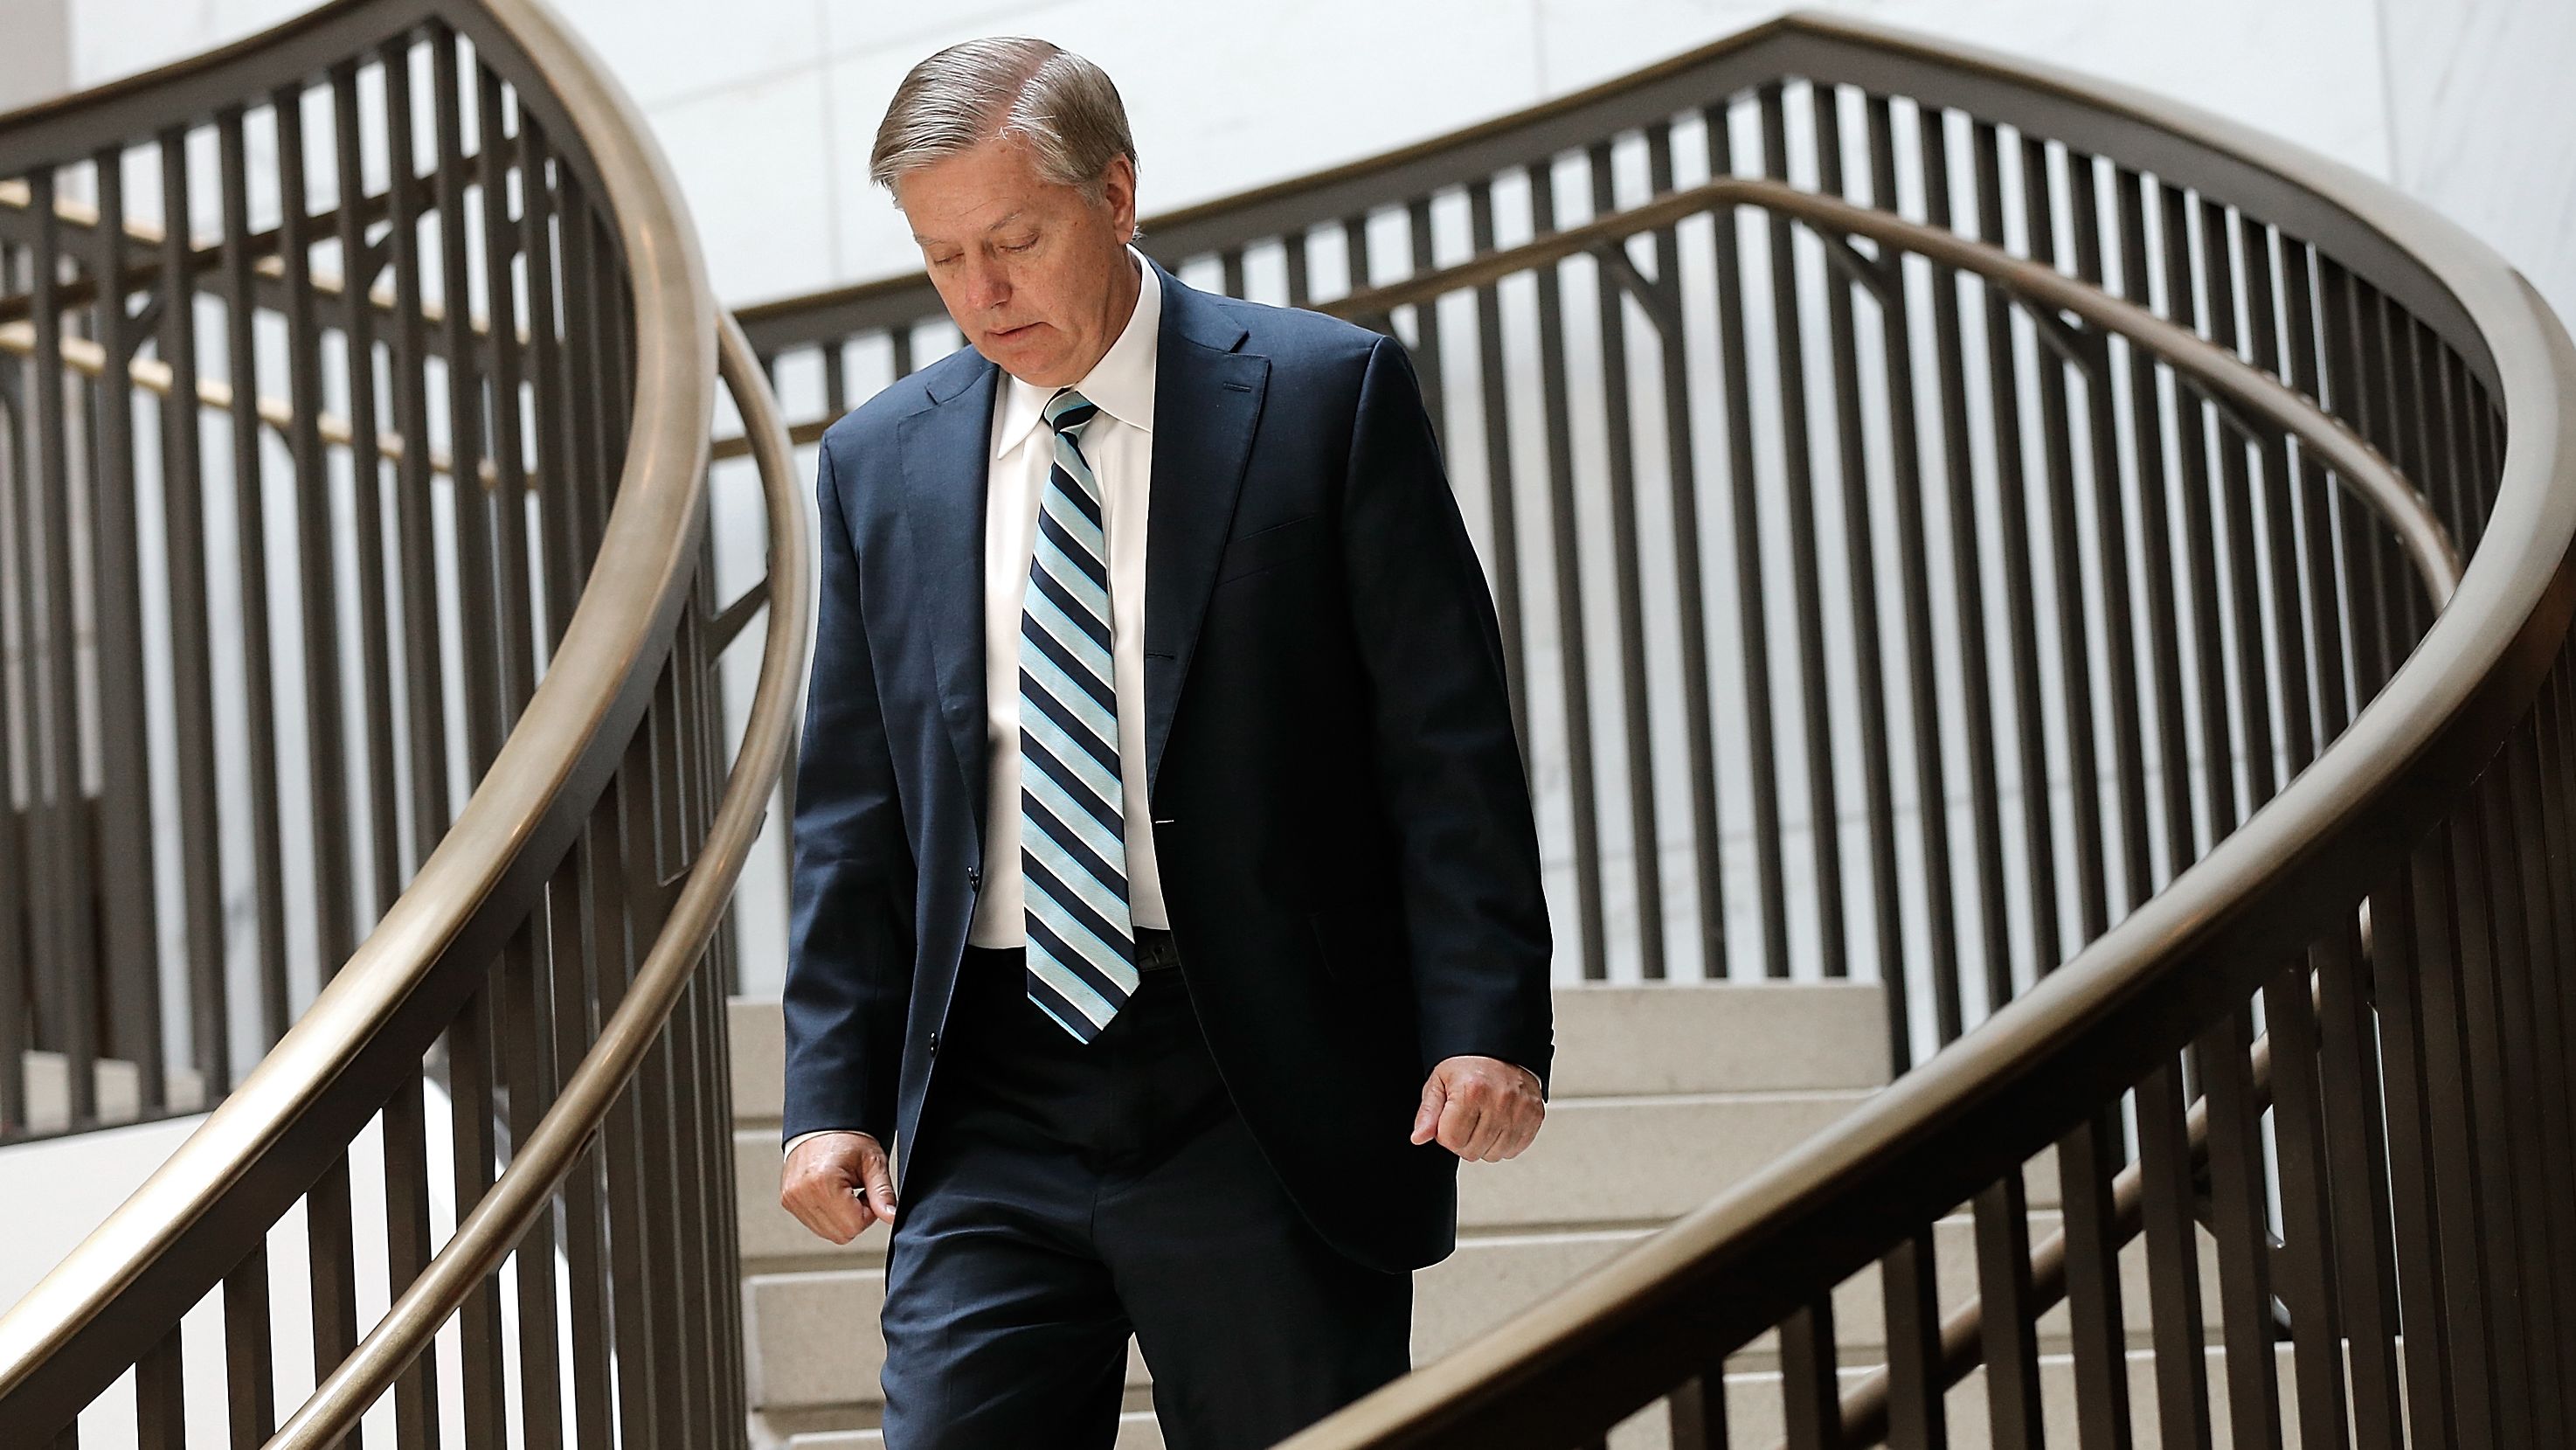 Sen. Lindsey Graham (R-SC) arrives for a Senate Armed Services Committee closed briefing July 30, 2014 in Washington, D.C. 